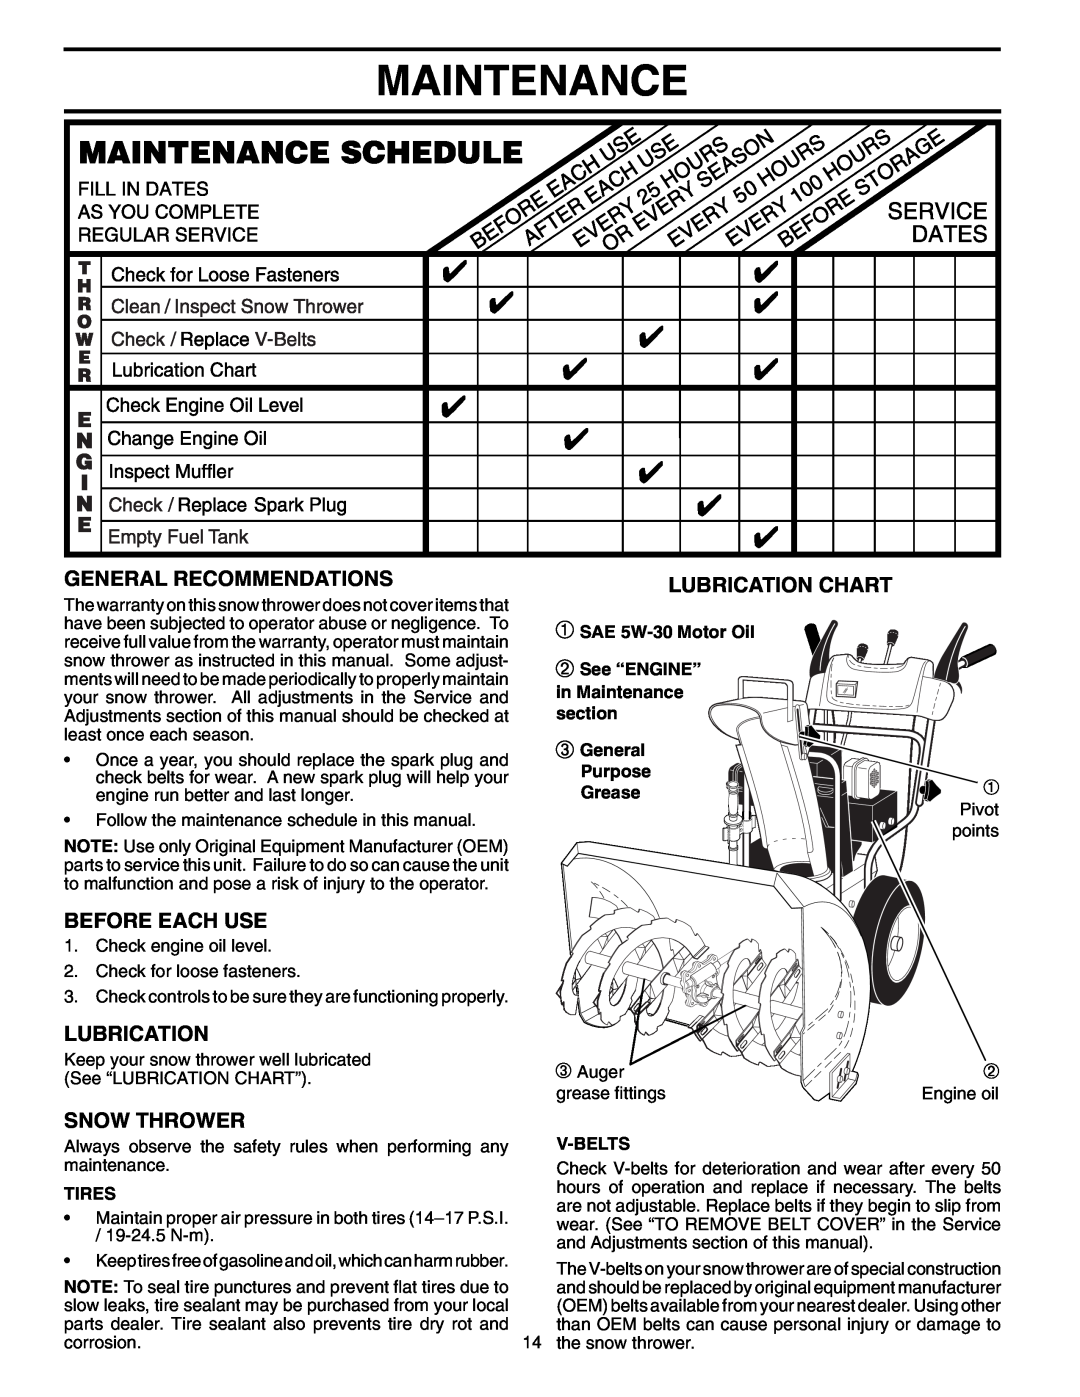 Poulan PP10530ES Maintenance, General Recommendations, Before Each Use, Lubrication Chart, Snow Thrower, Tires 